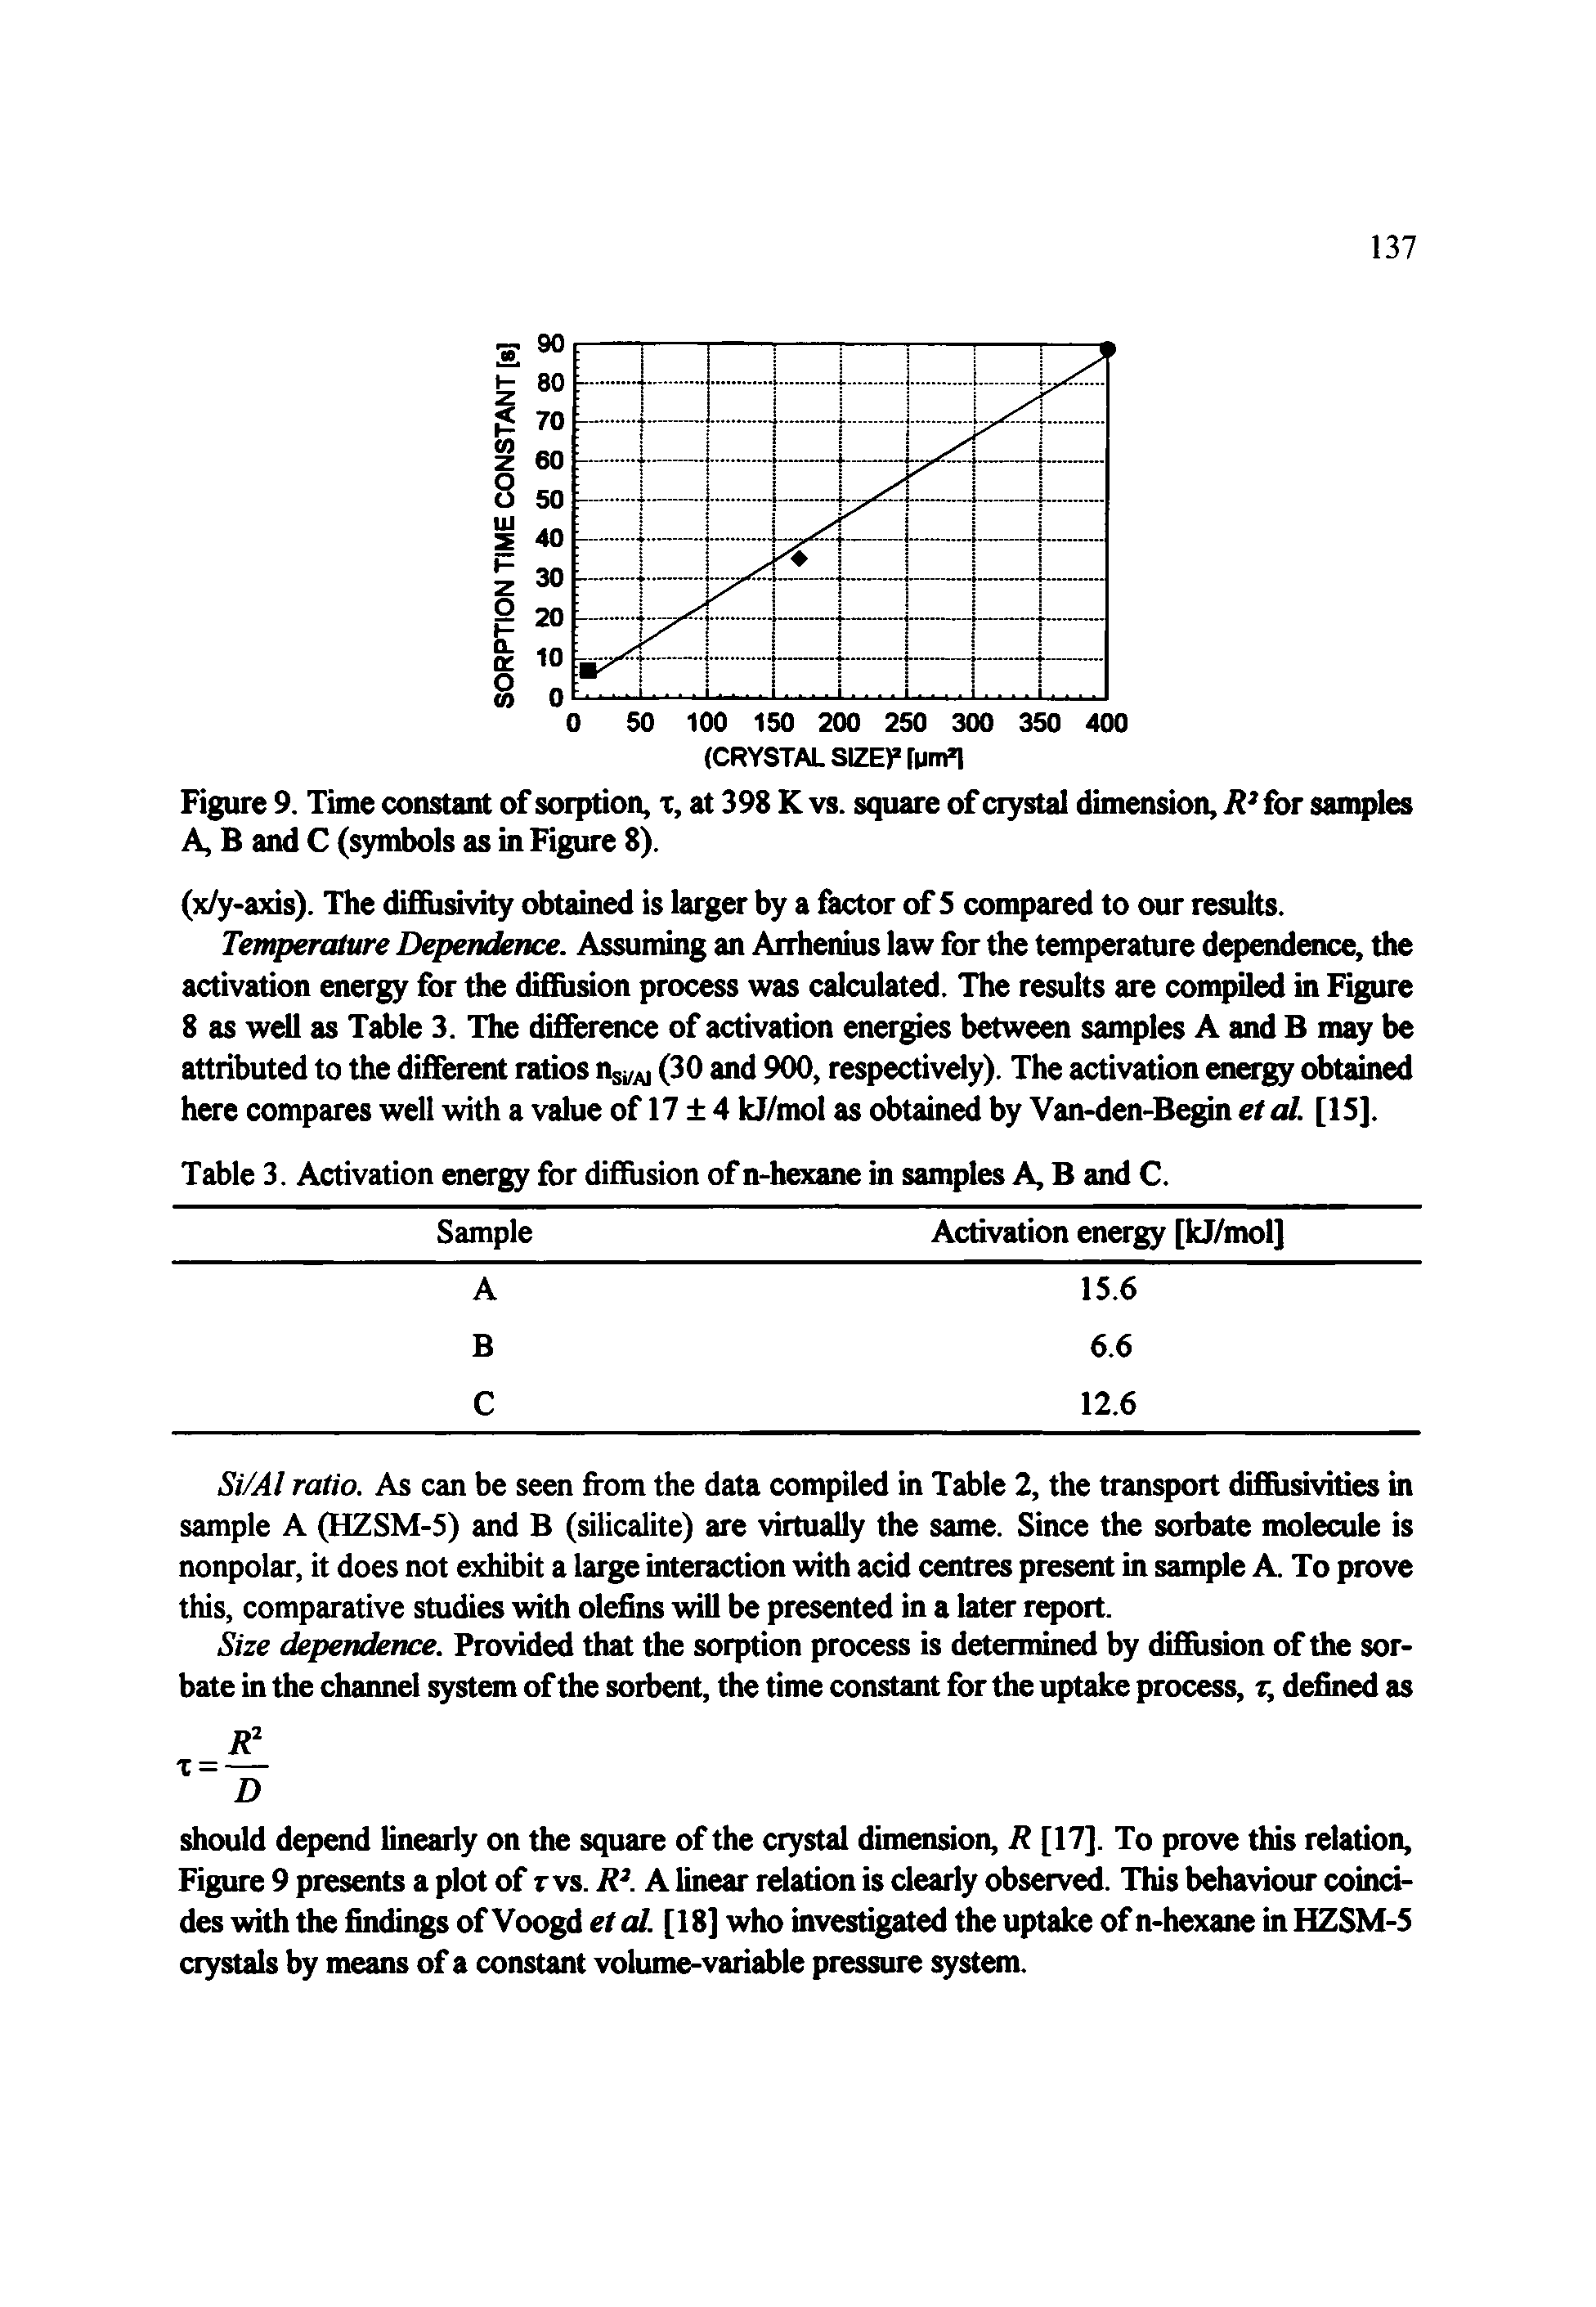 Table 3. Activation energy for diffusion of n-hexane in samples A, B and C.